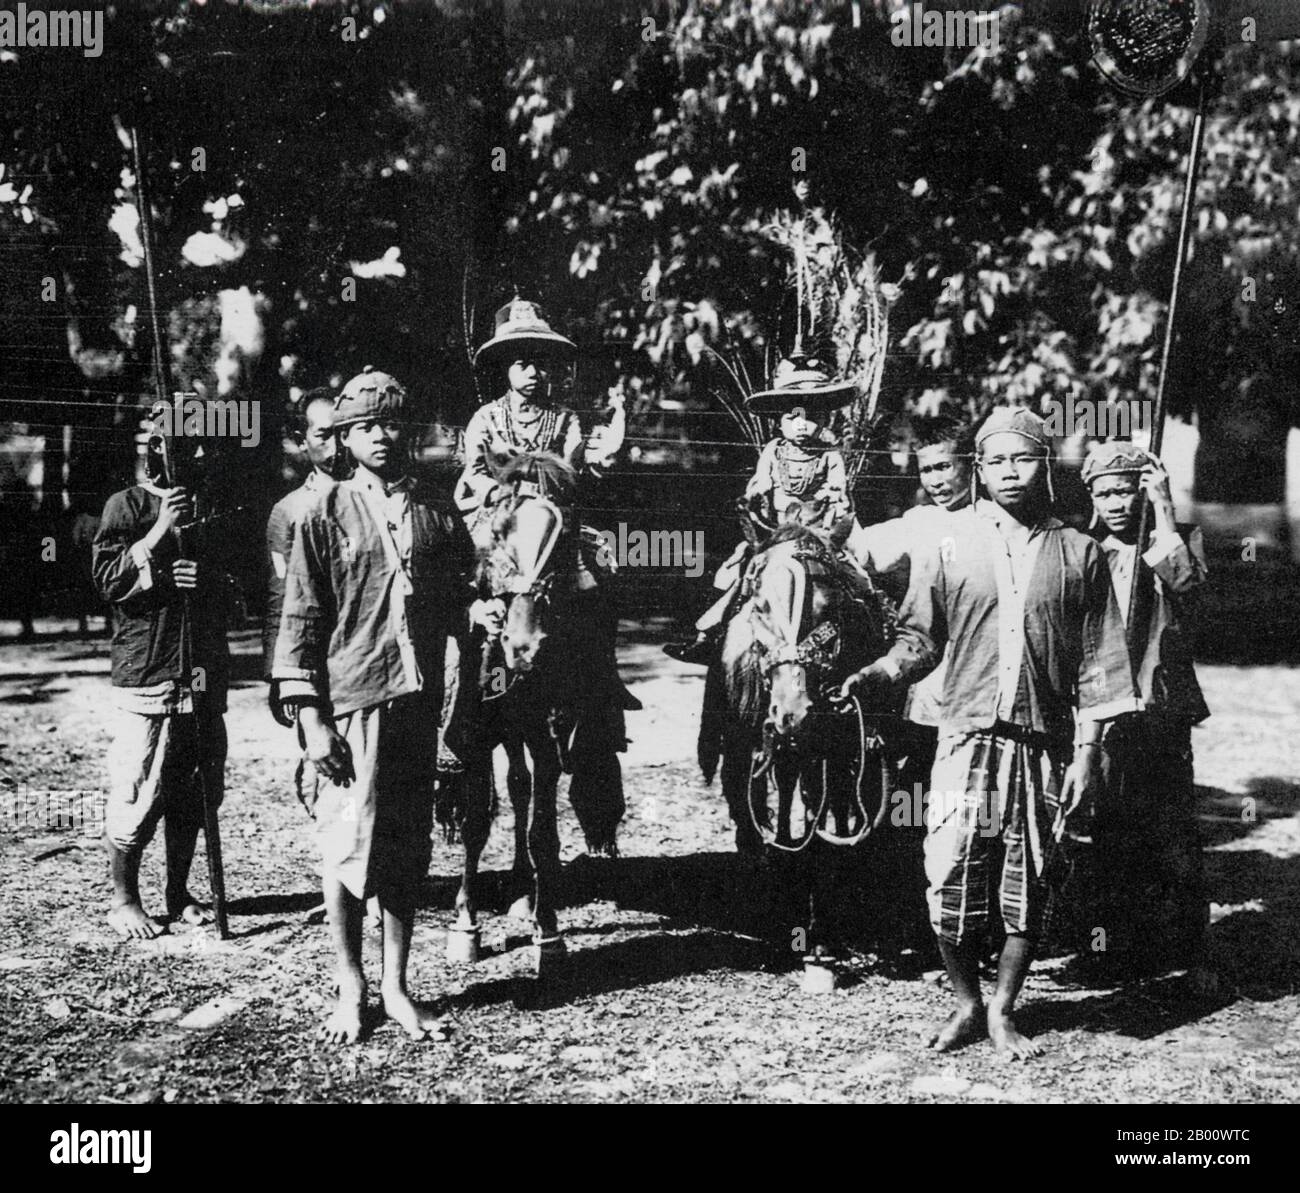 Laos: Two of HM Sisavang Vong’s many children take a ride on horses with servants in attendance, photographed in 1919.  Sisavang Phoulivong (1885 - 1959) was the king of Luang Prabang and later the Kingdom of Laos. His father was king Zakarine and his mother was Queen Thongsy. He was educated at Lycée Chasseloup-Laubat, Saigon, and at l'École Coloniale in Paris. He was known as a 'playboy' king with up to 50 children by as many as 15 wives. Stock Photo